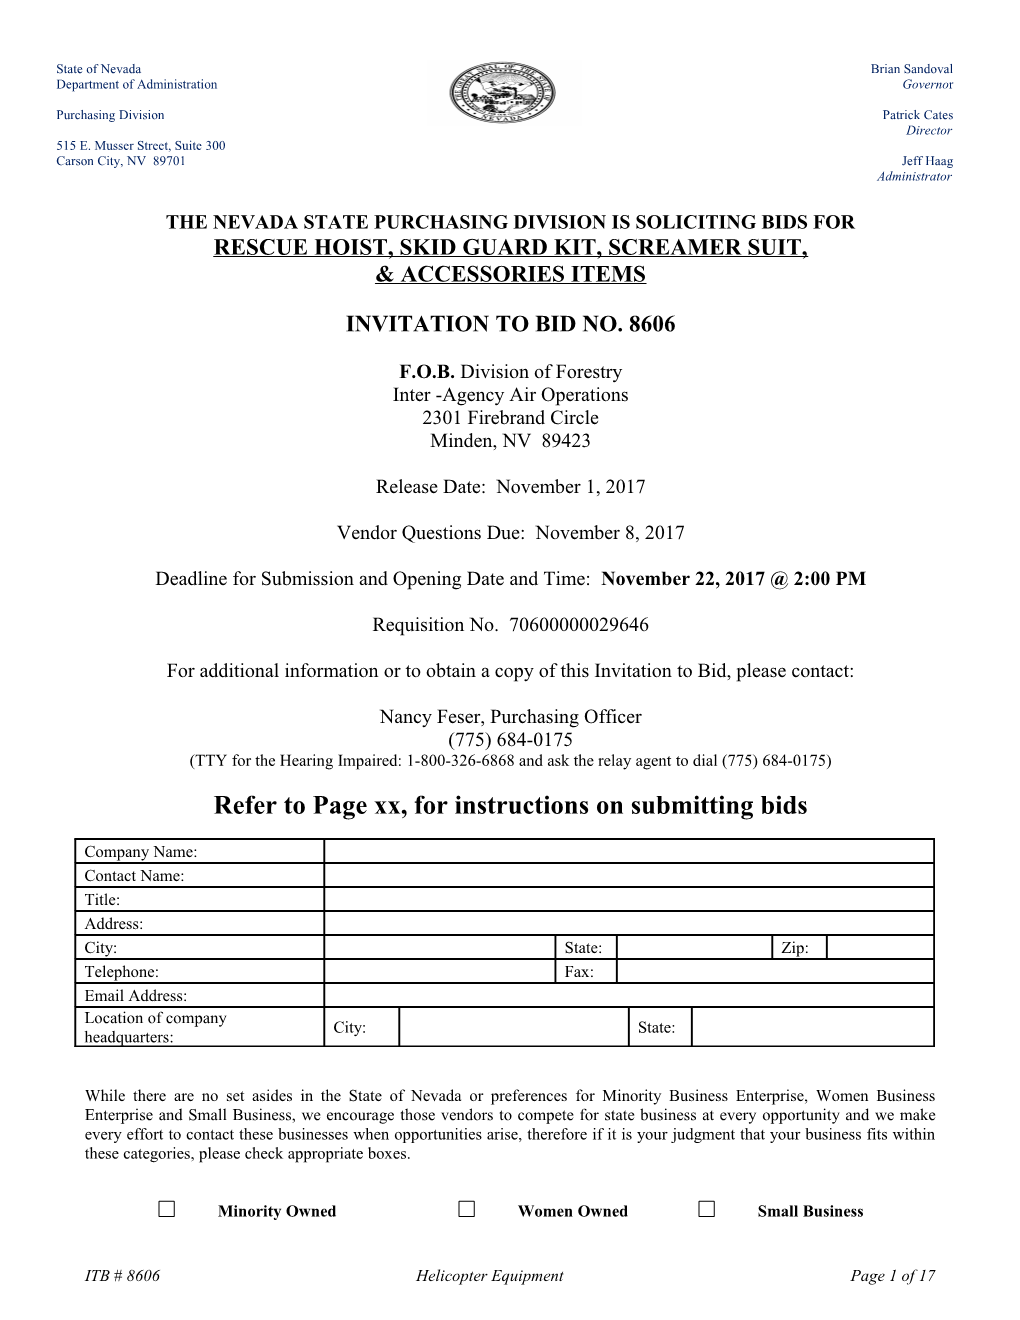 The Nevada State Purchasing Division Is Soliciting Bids For